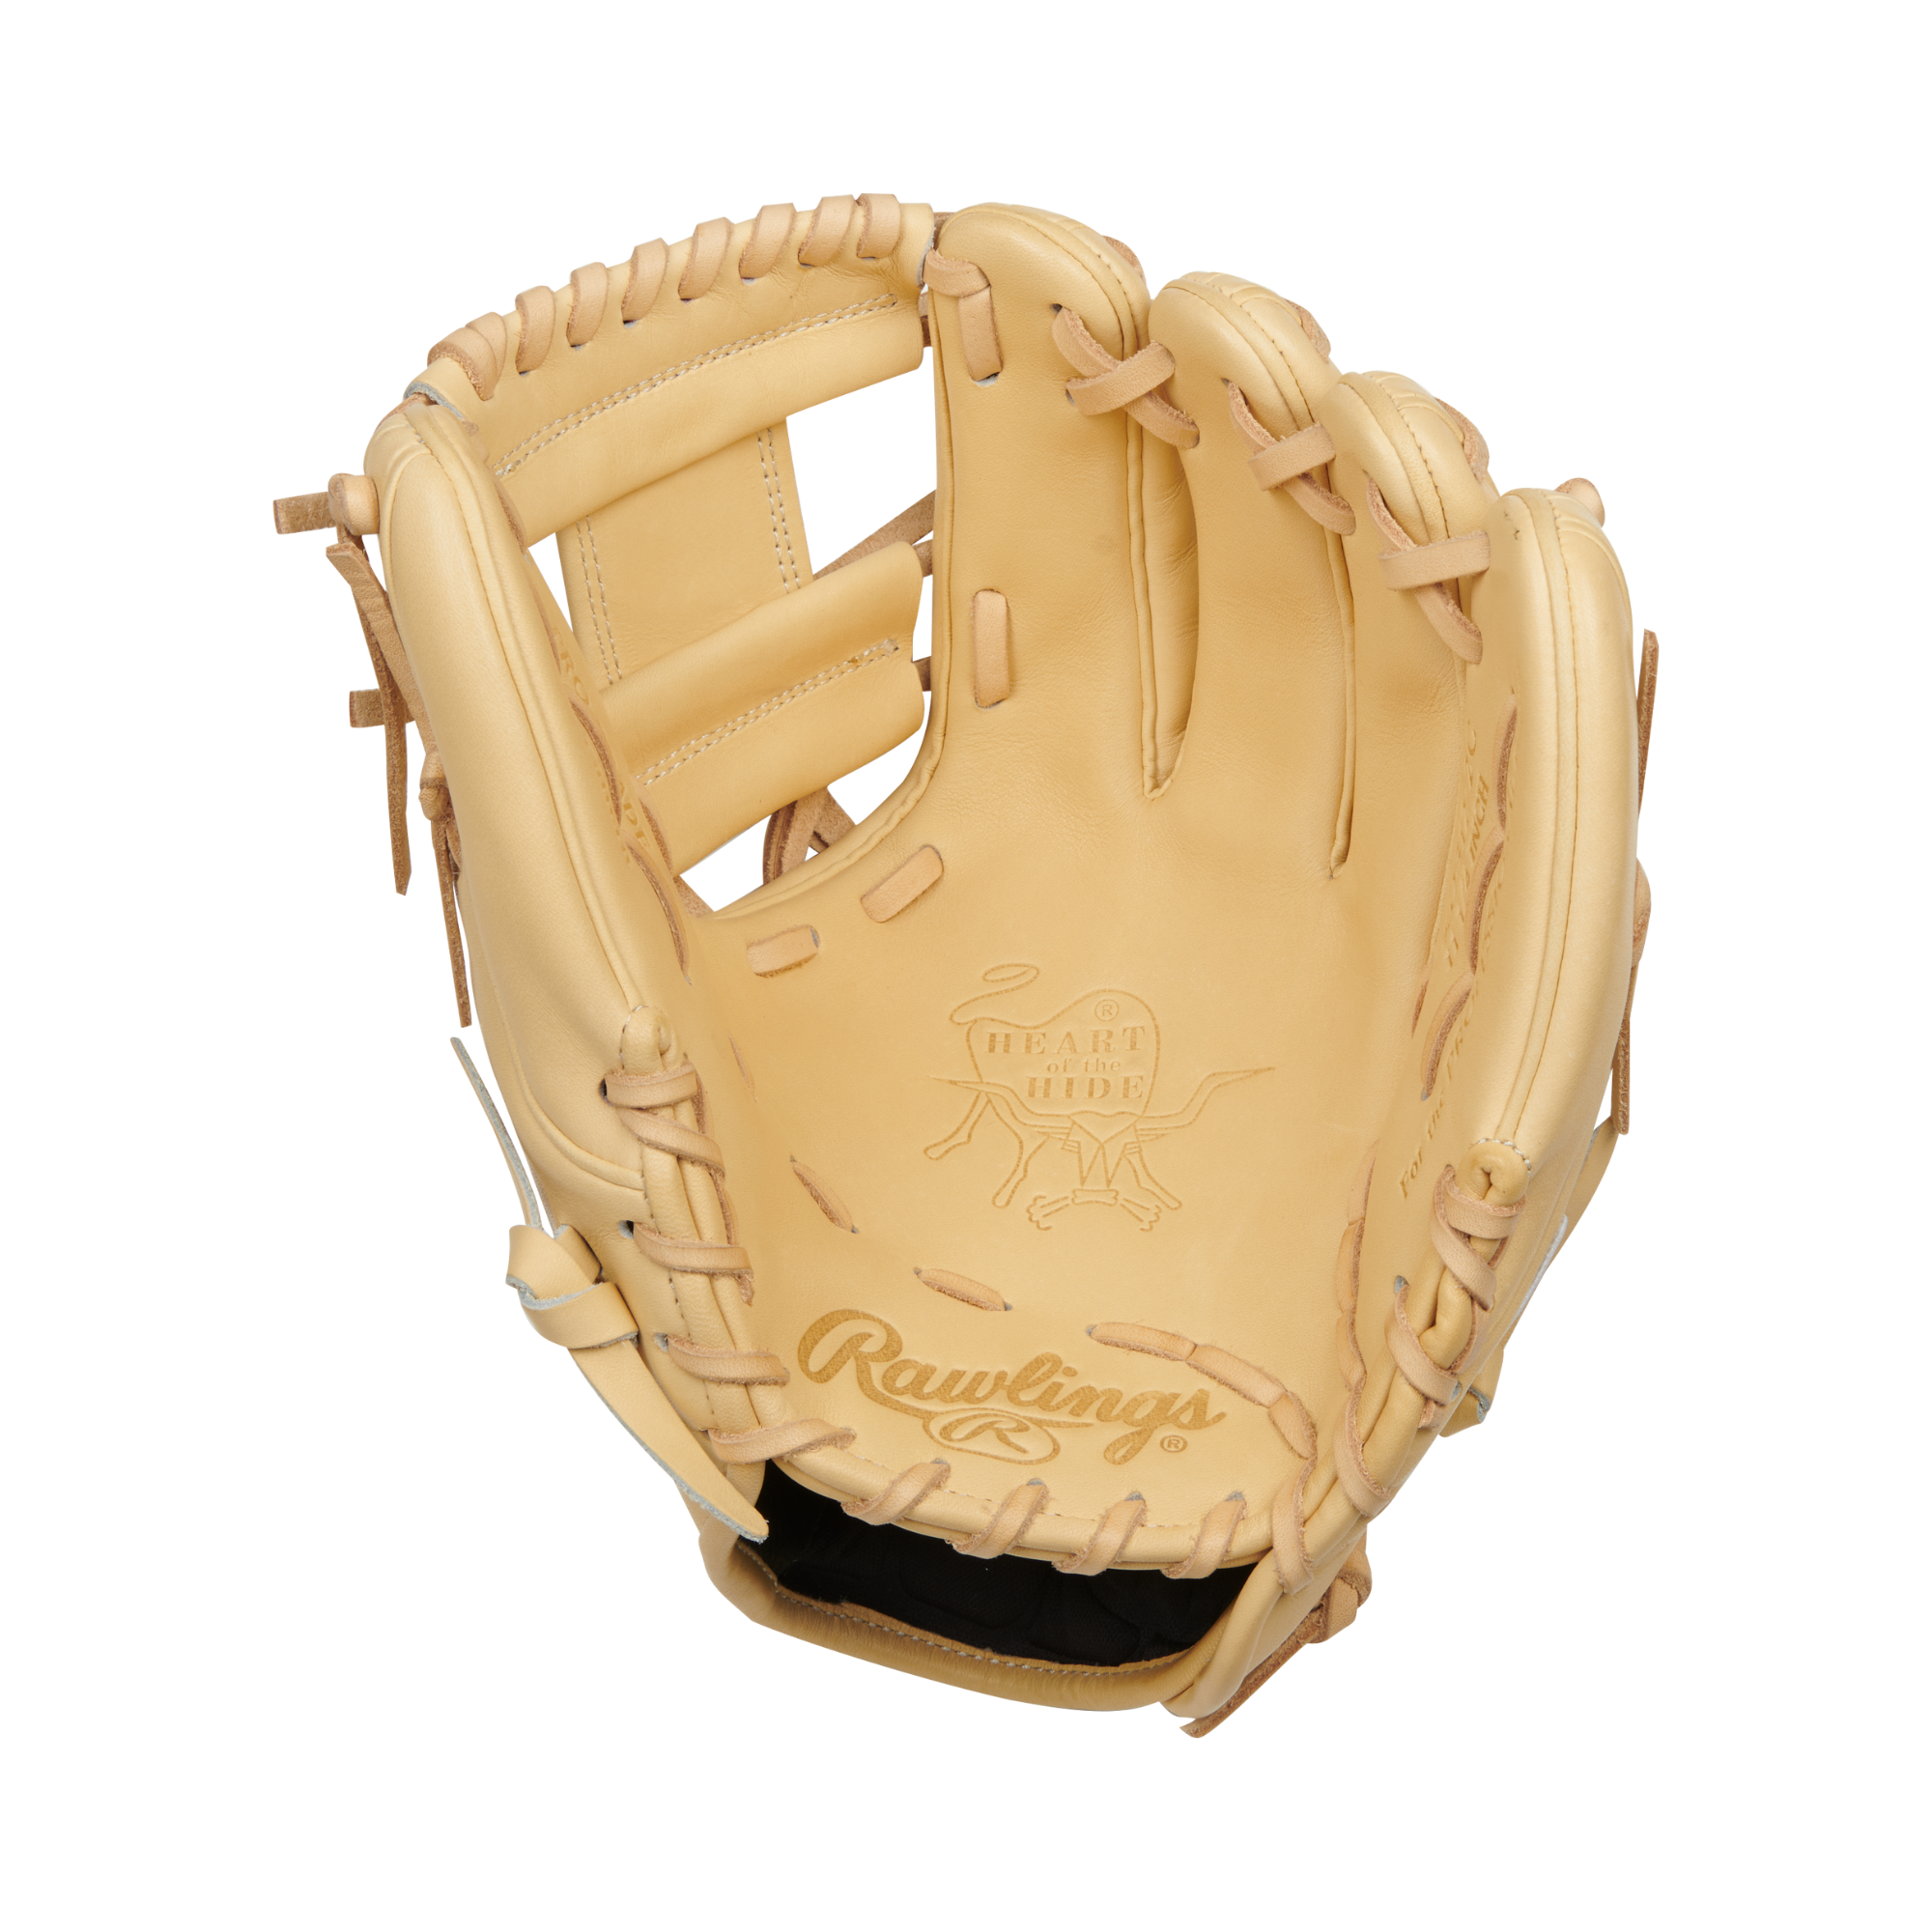 Rawlings Heart of the Hide 11.25 in Baseball Glove - Throwing Hand: Right